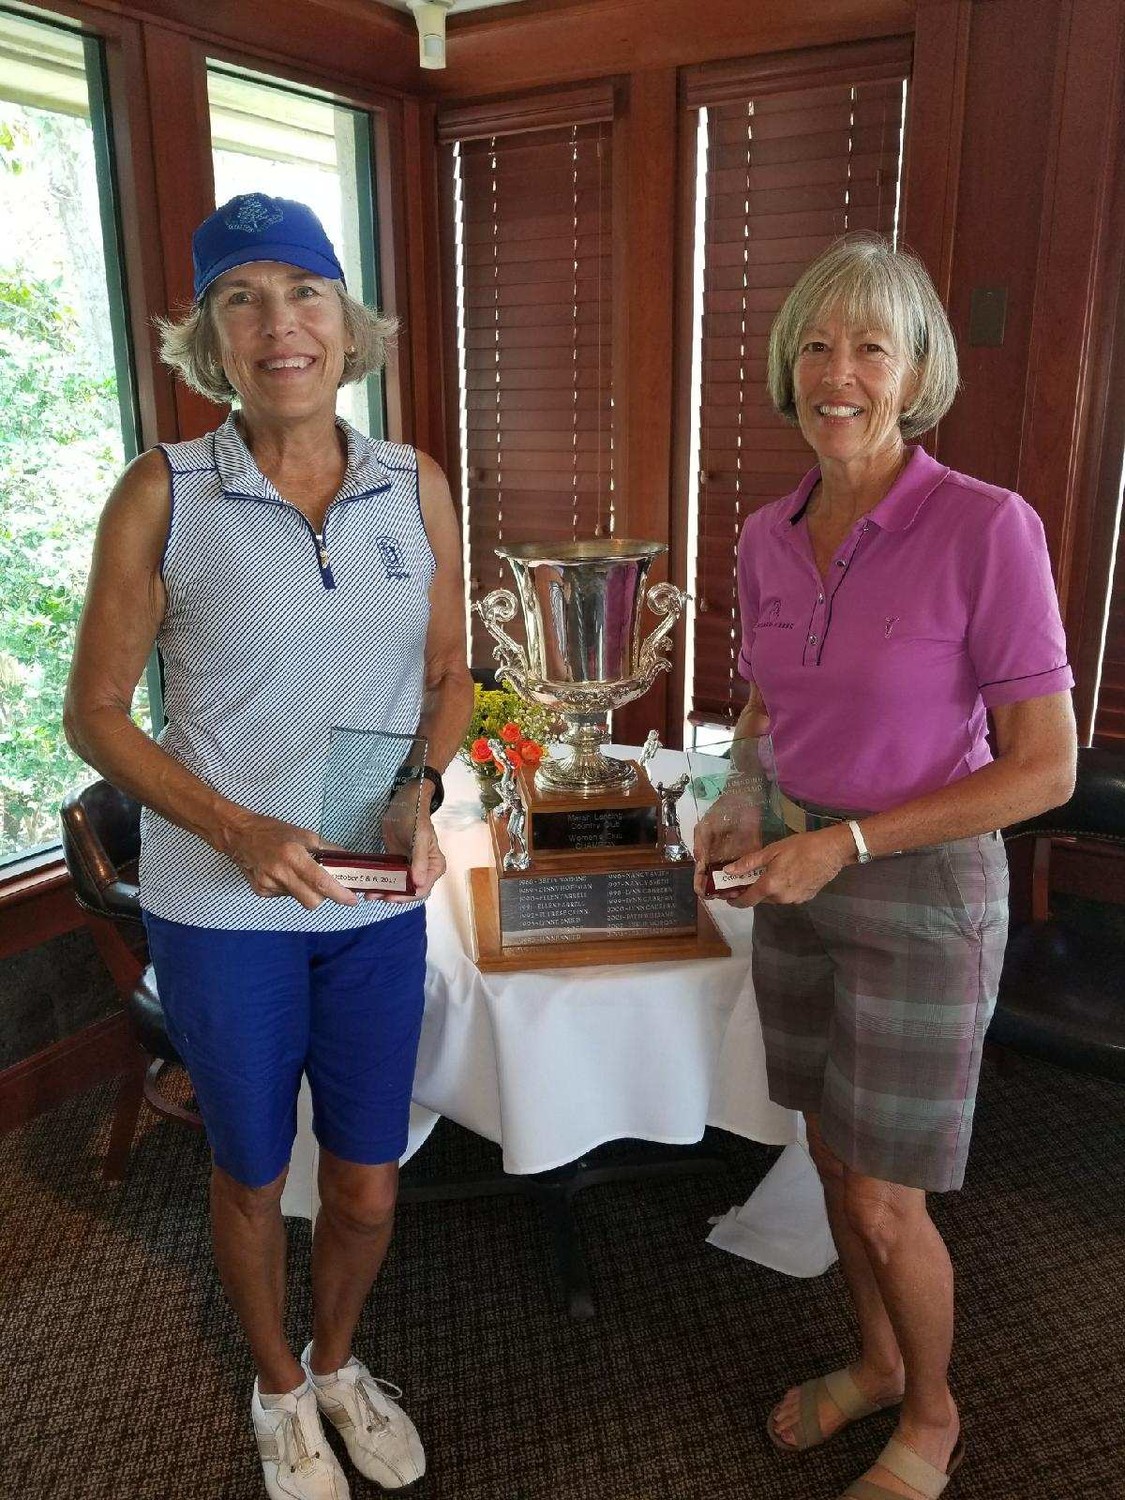 Helen Short (right) won the Marsh Landing Women’s Club Championship for the second year in a row, and Peggy Stanley (left) earned the net champion title. The gross champion of the pink tee division was Linda Doran. The tournament was held Oct. 5 and 6 at the Marsh Landing Country Club.